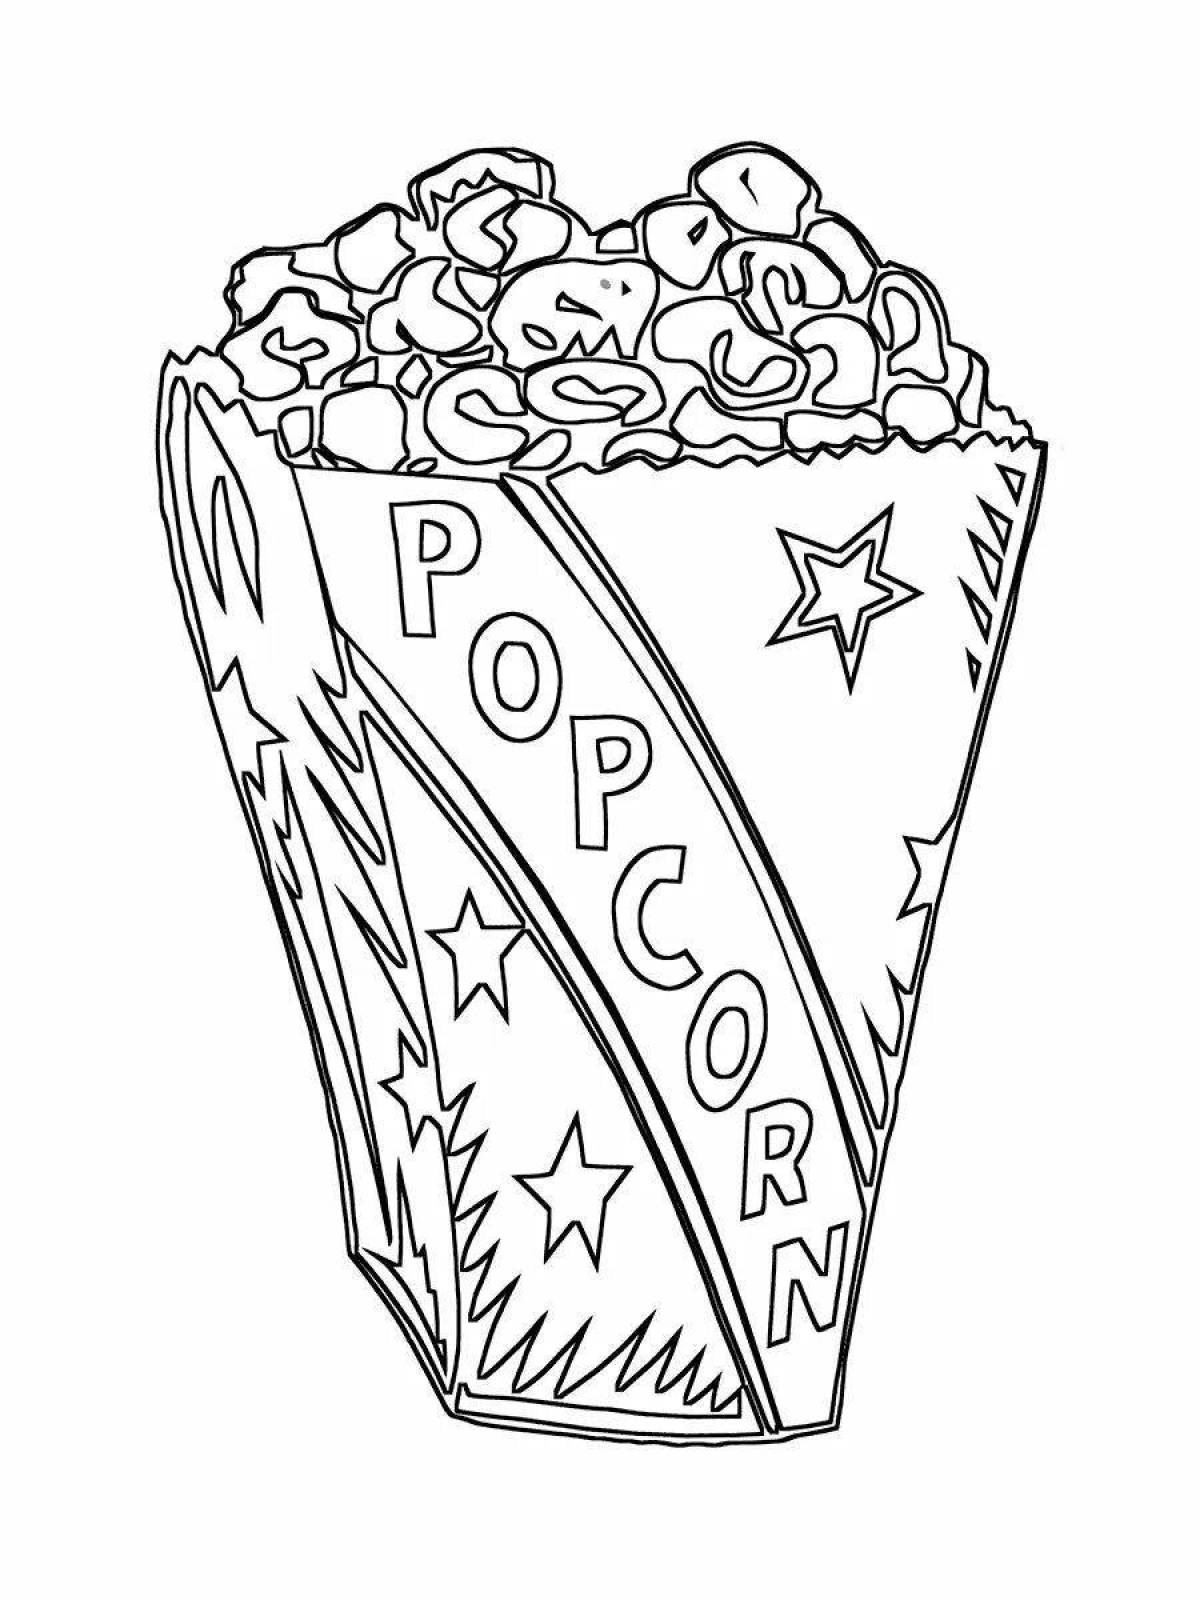 Charming popcorn coloring book for kids